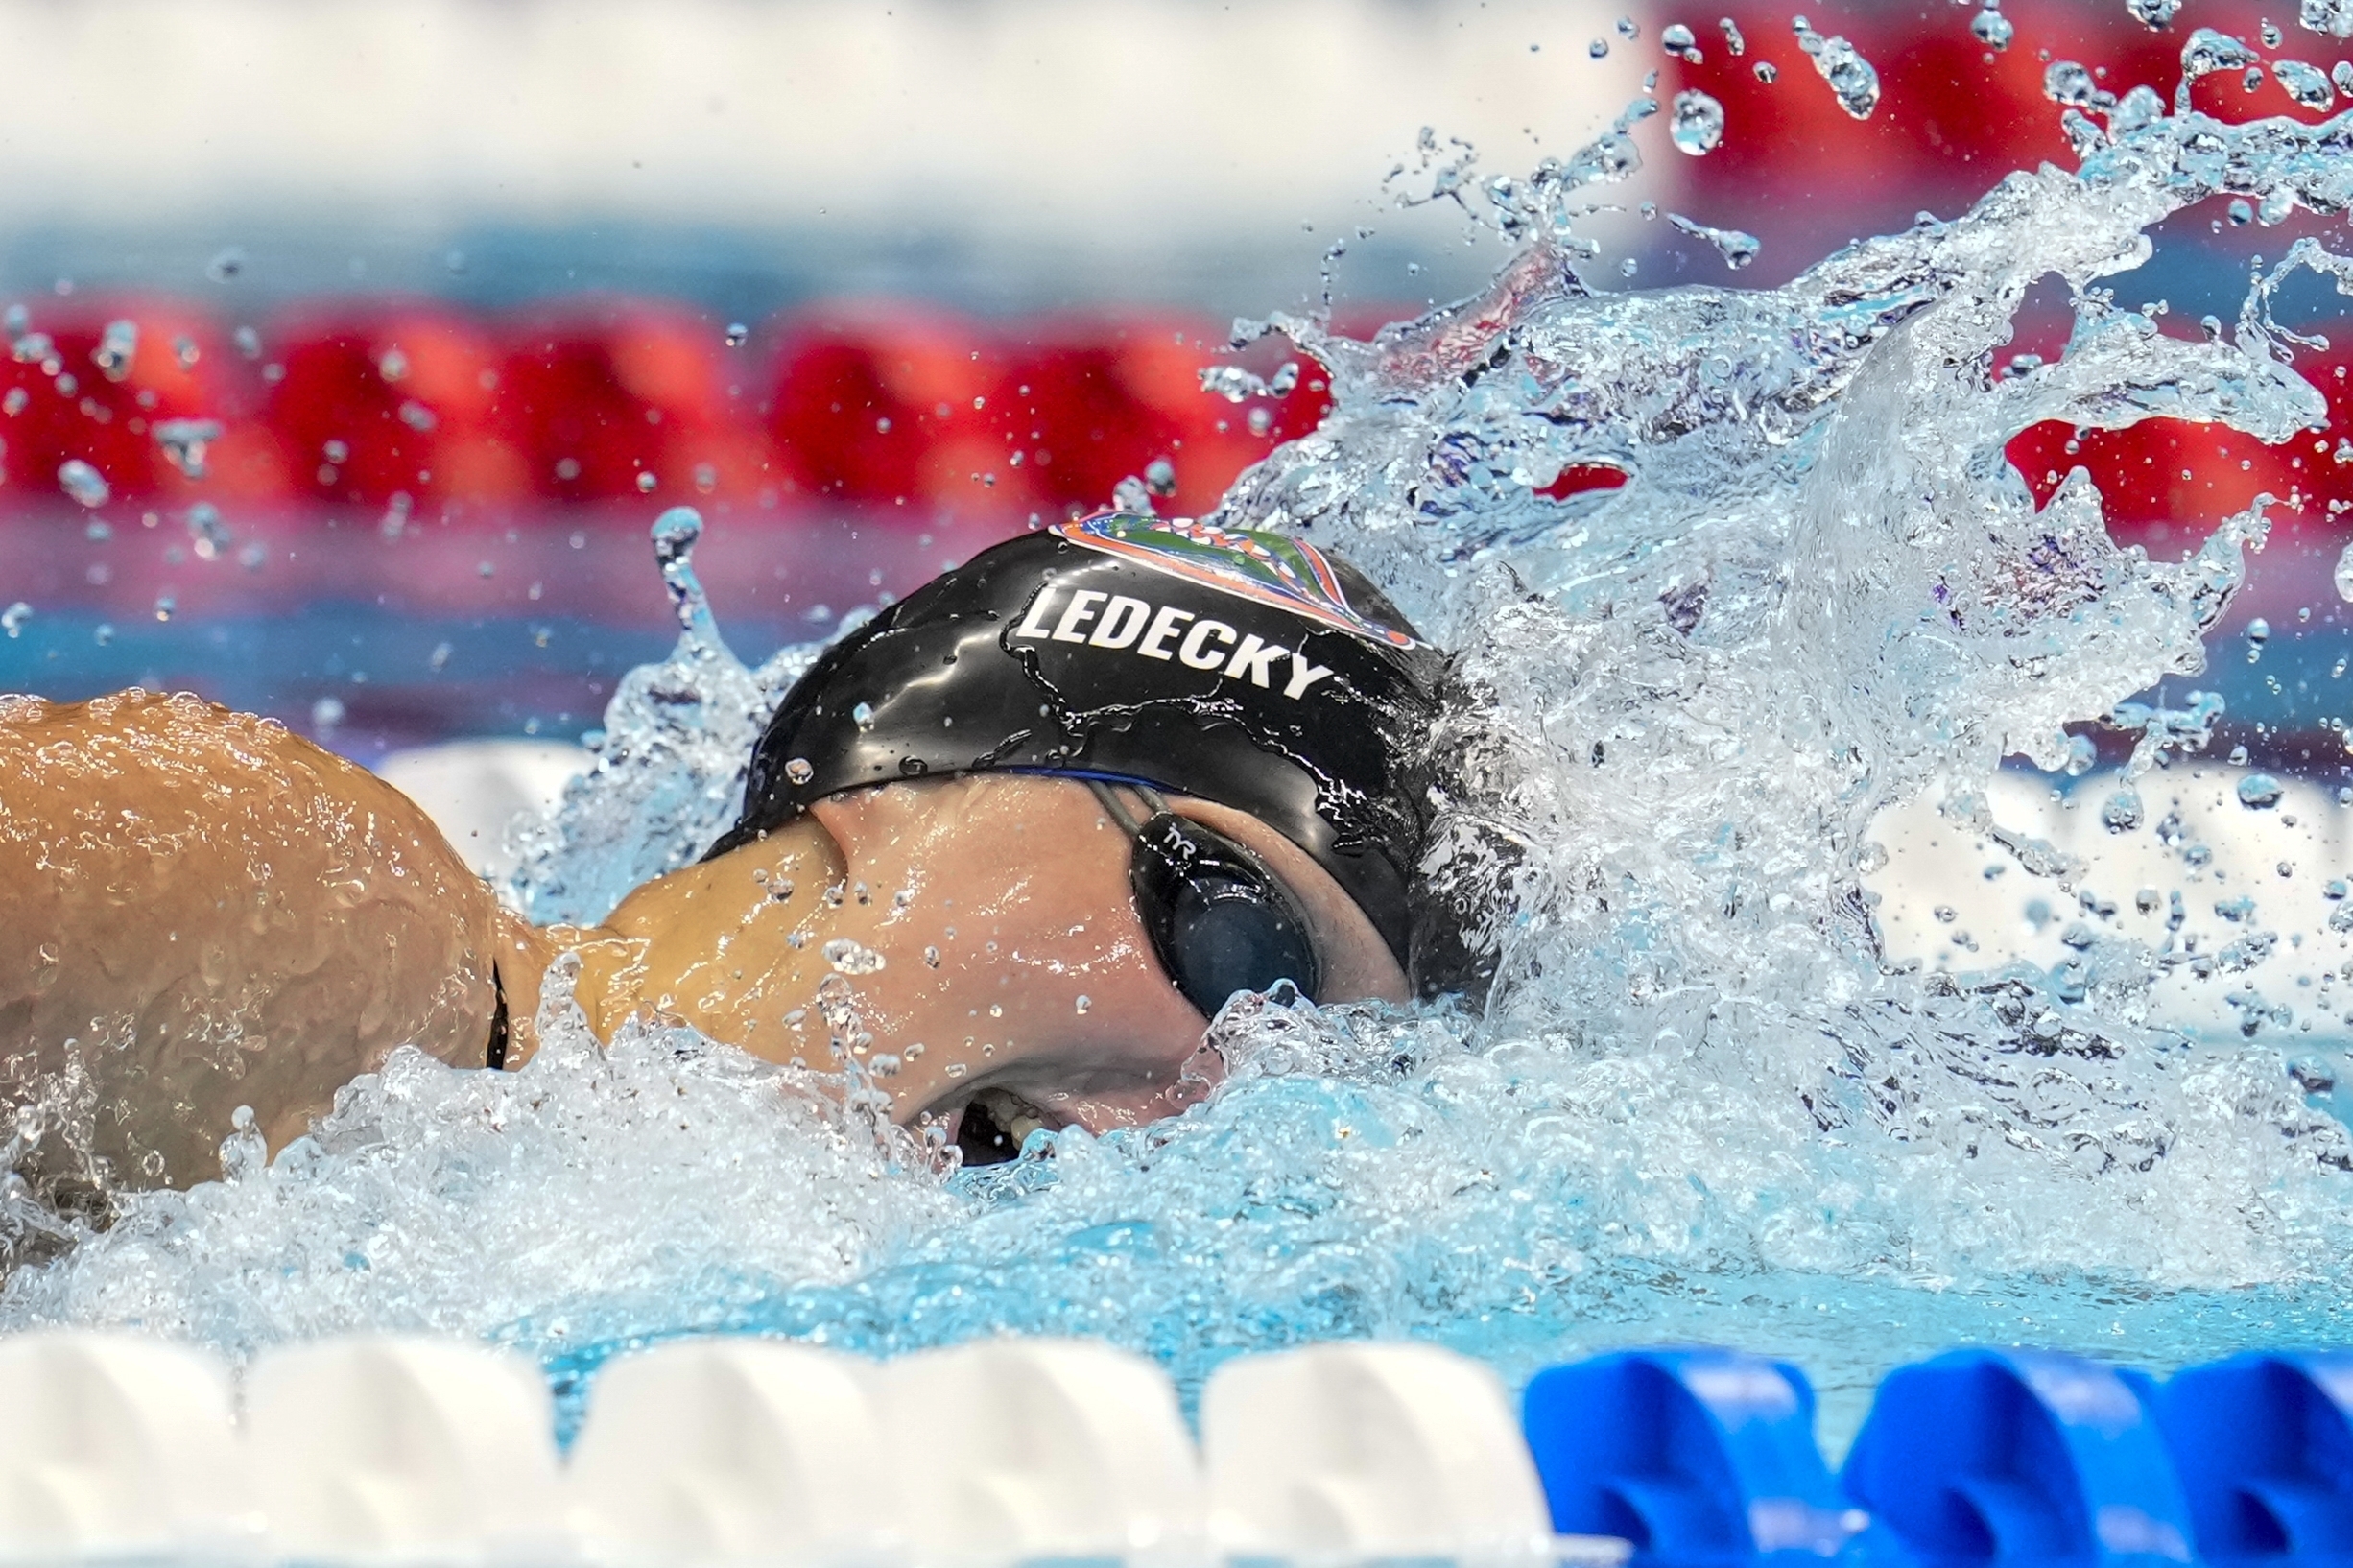 Katie Ledecky swims during the Women's 400 freestyle preliminaries Saturday at the U.S. Swimming Olympic Trials in Indianapoils.